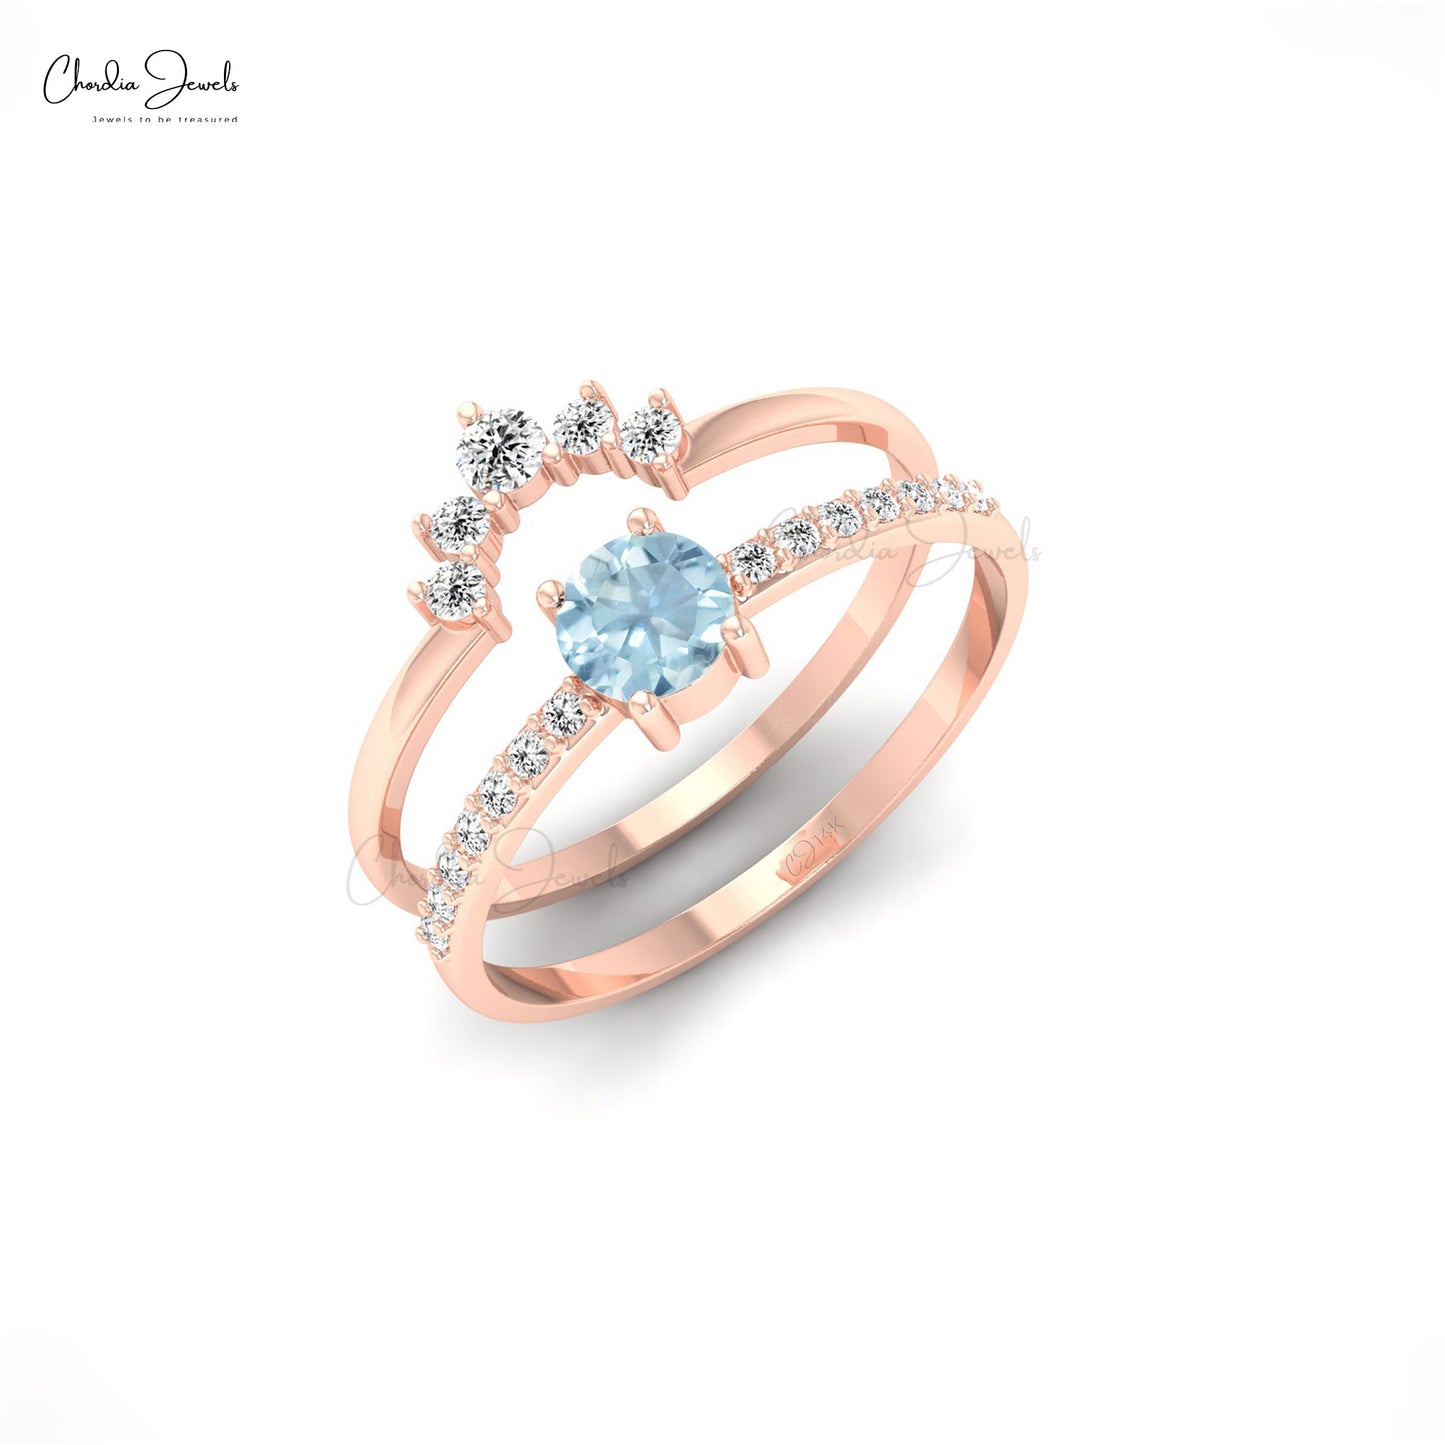 Stackable 14k Gold Aquamarine Ring with Genuine Diamonds 0.27ct March Birthstone Ring